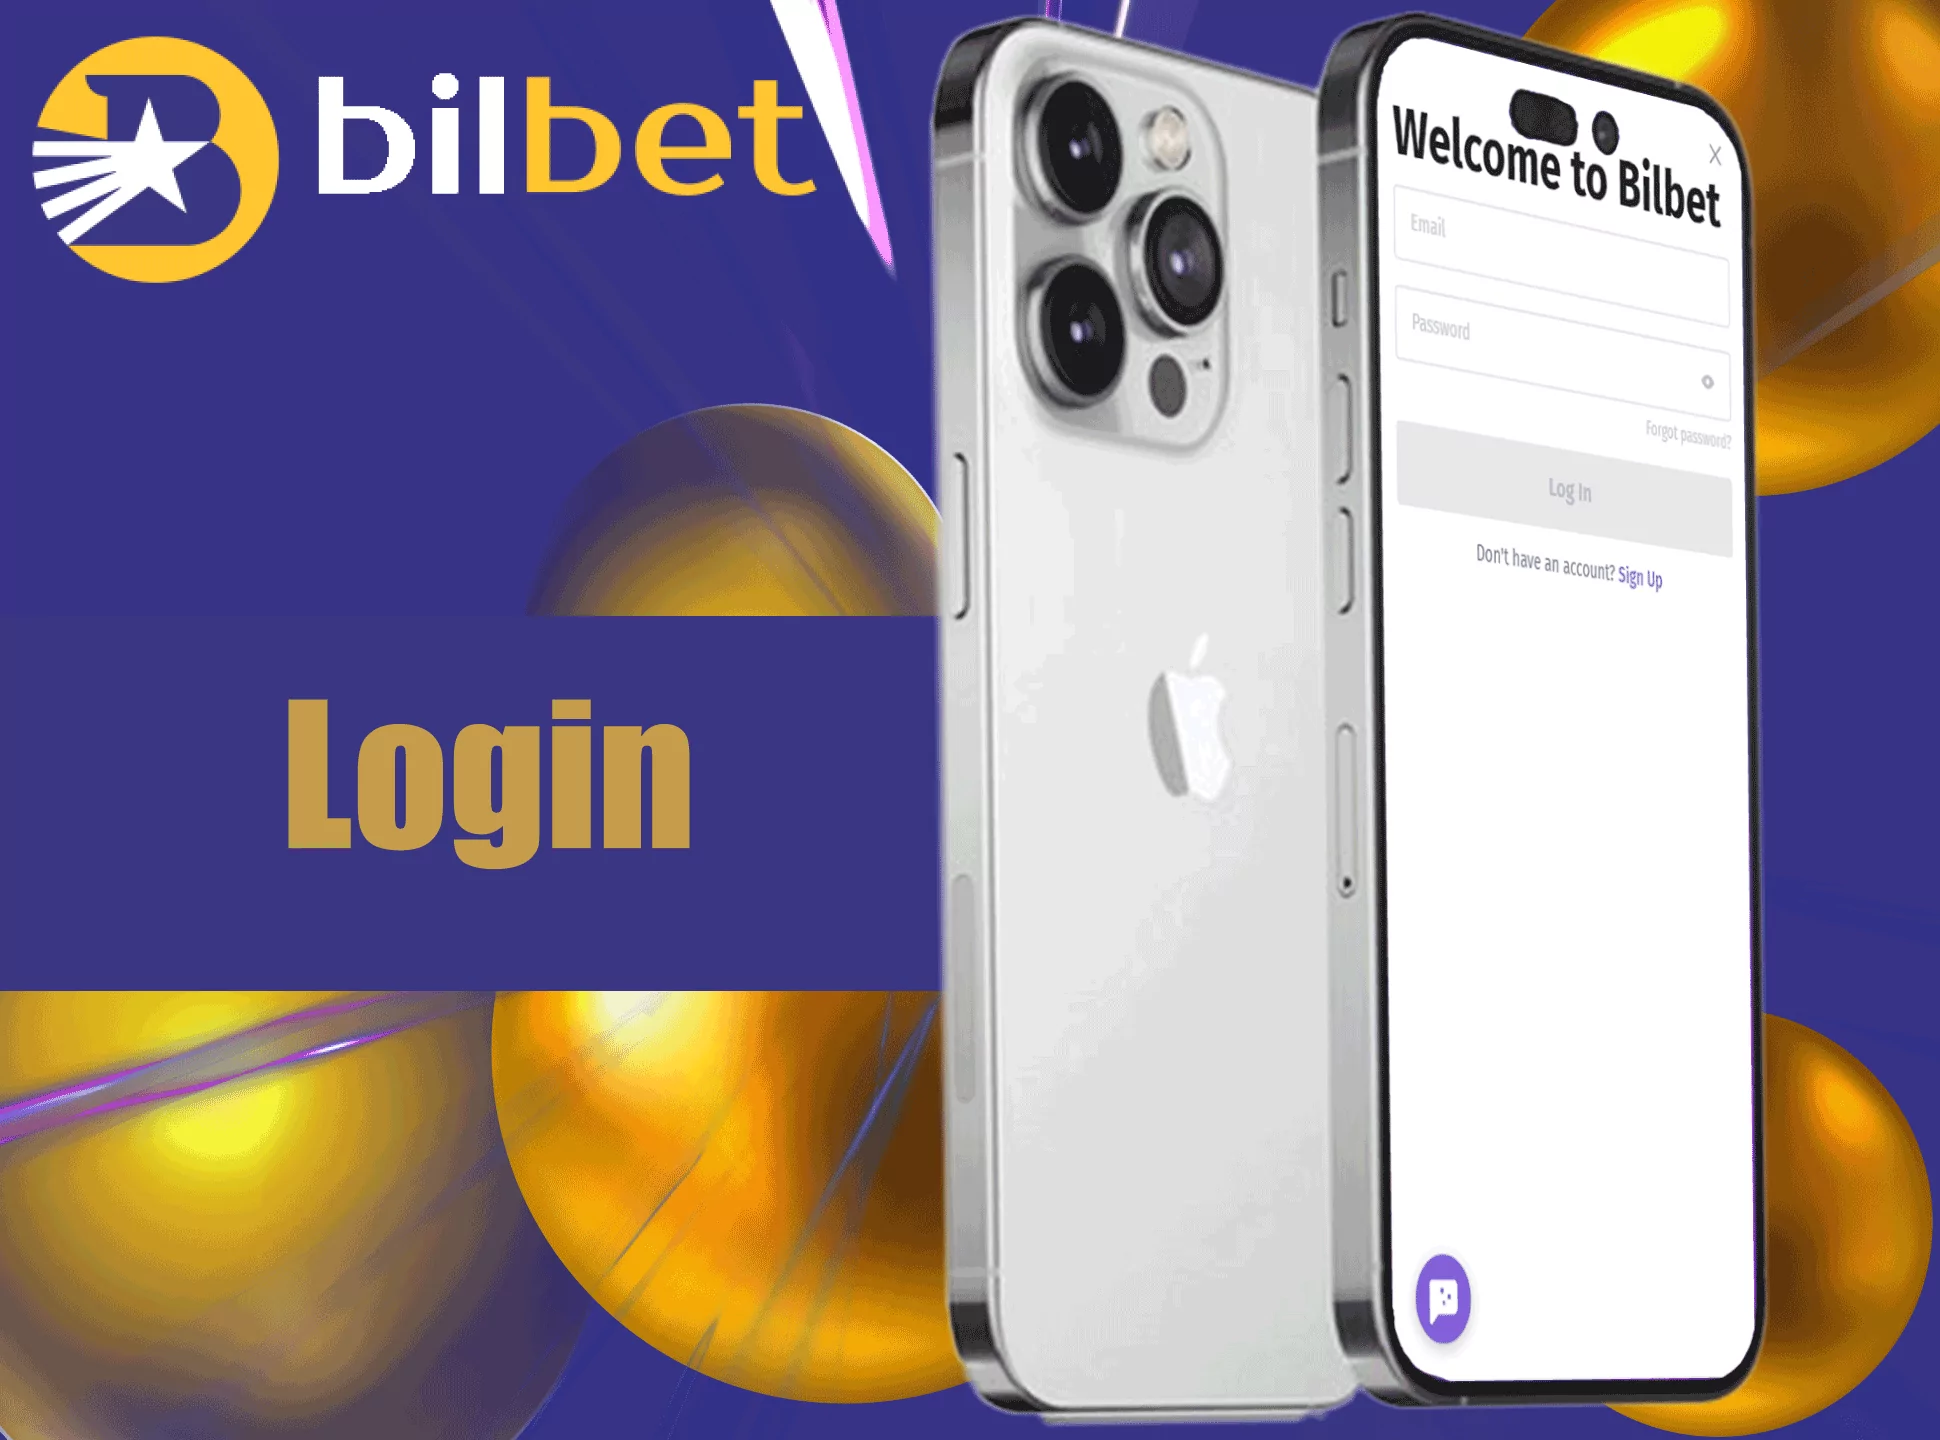 Type in your username and password to log in to Bilbet.